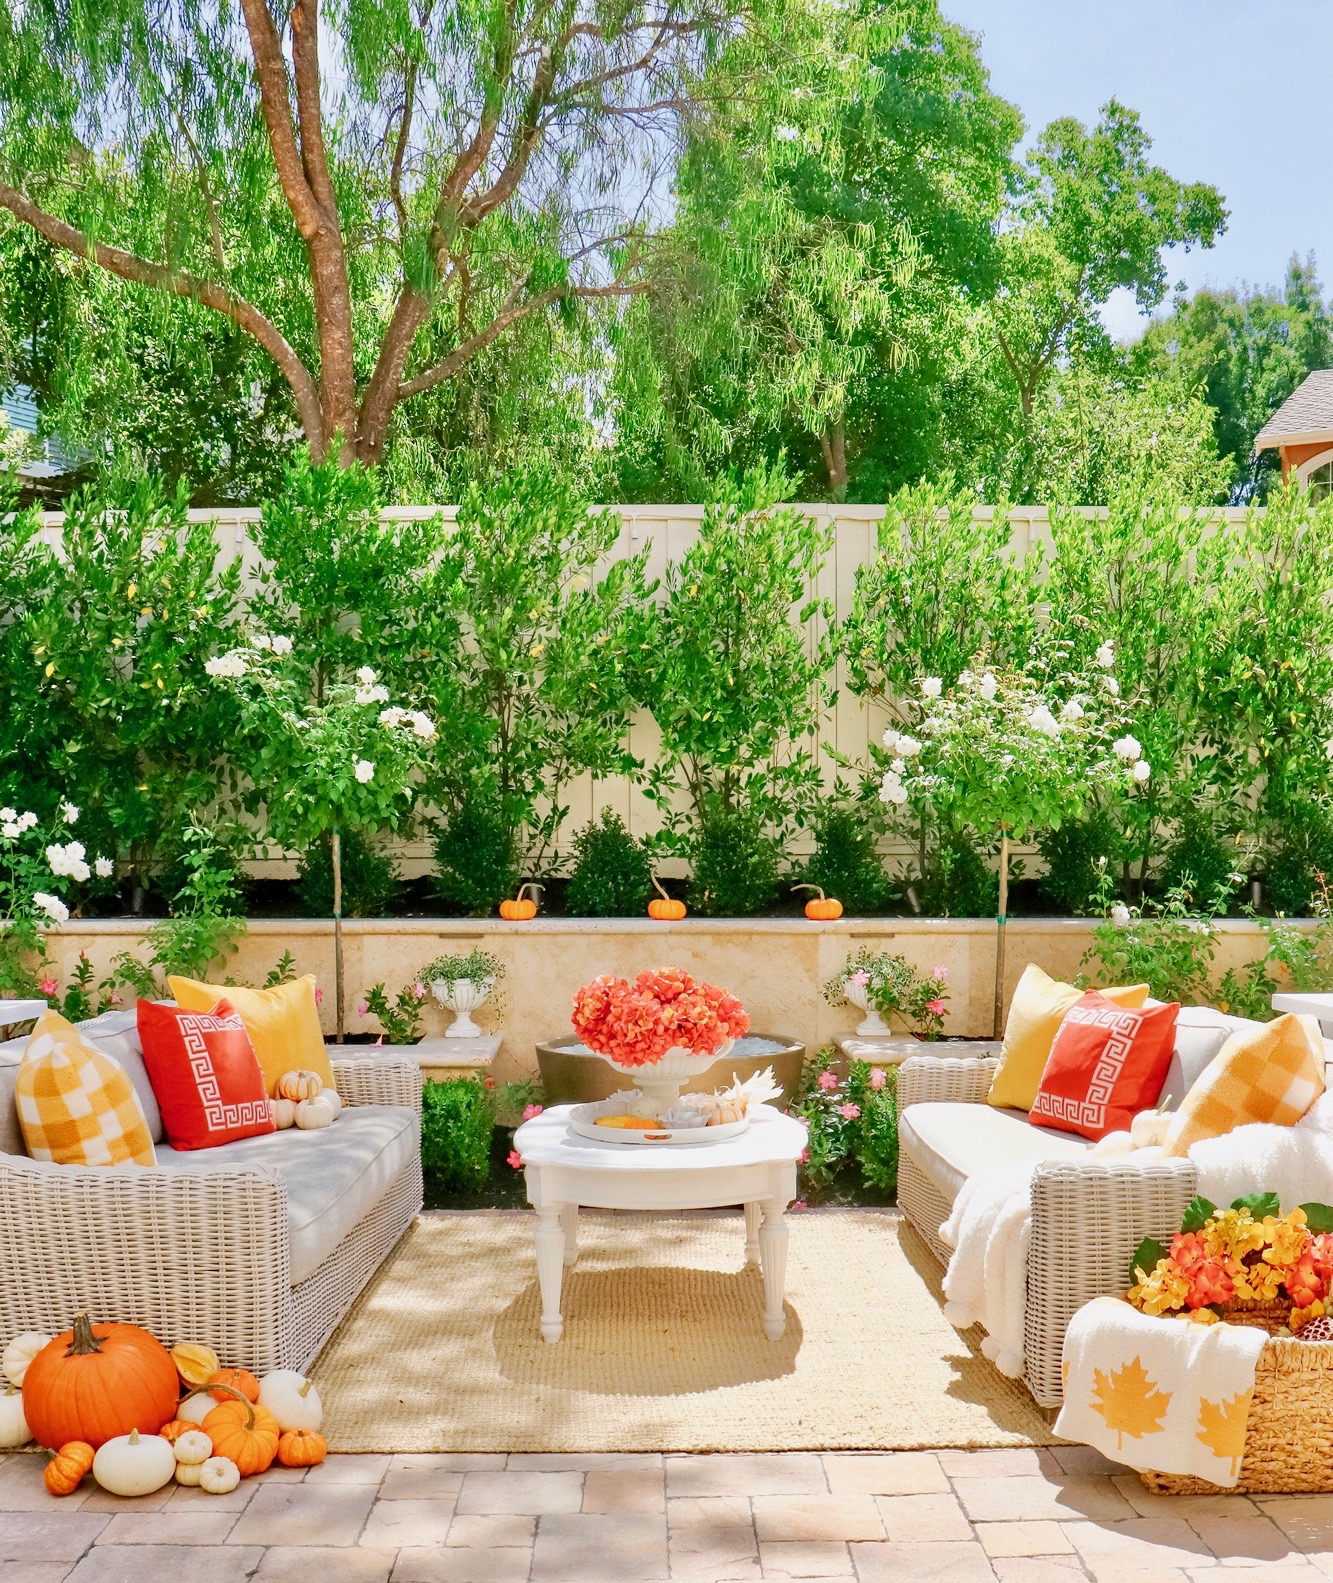 Colorful Fall Outdoor Inspiration and Decor - Pumpkins, harvest, oranges, reds, yellows and more this year. Everything a cozy outdoor space needs in autumn!